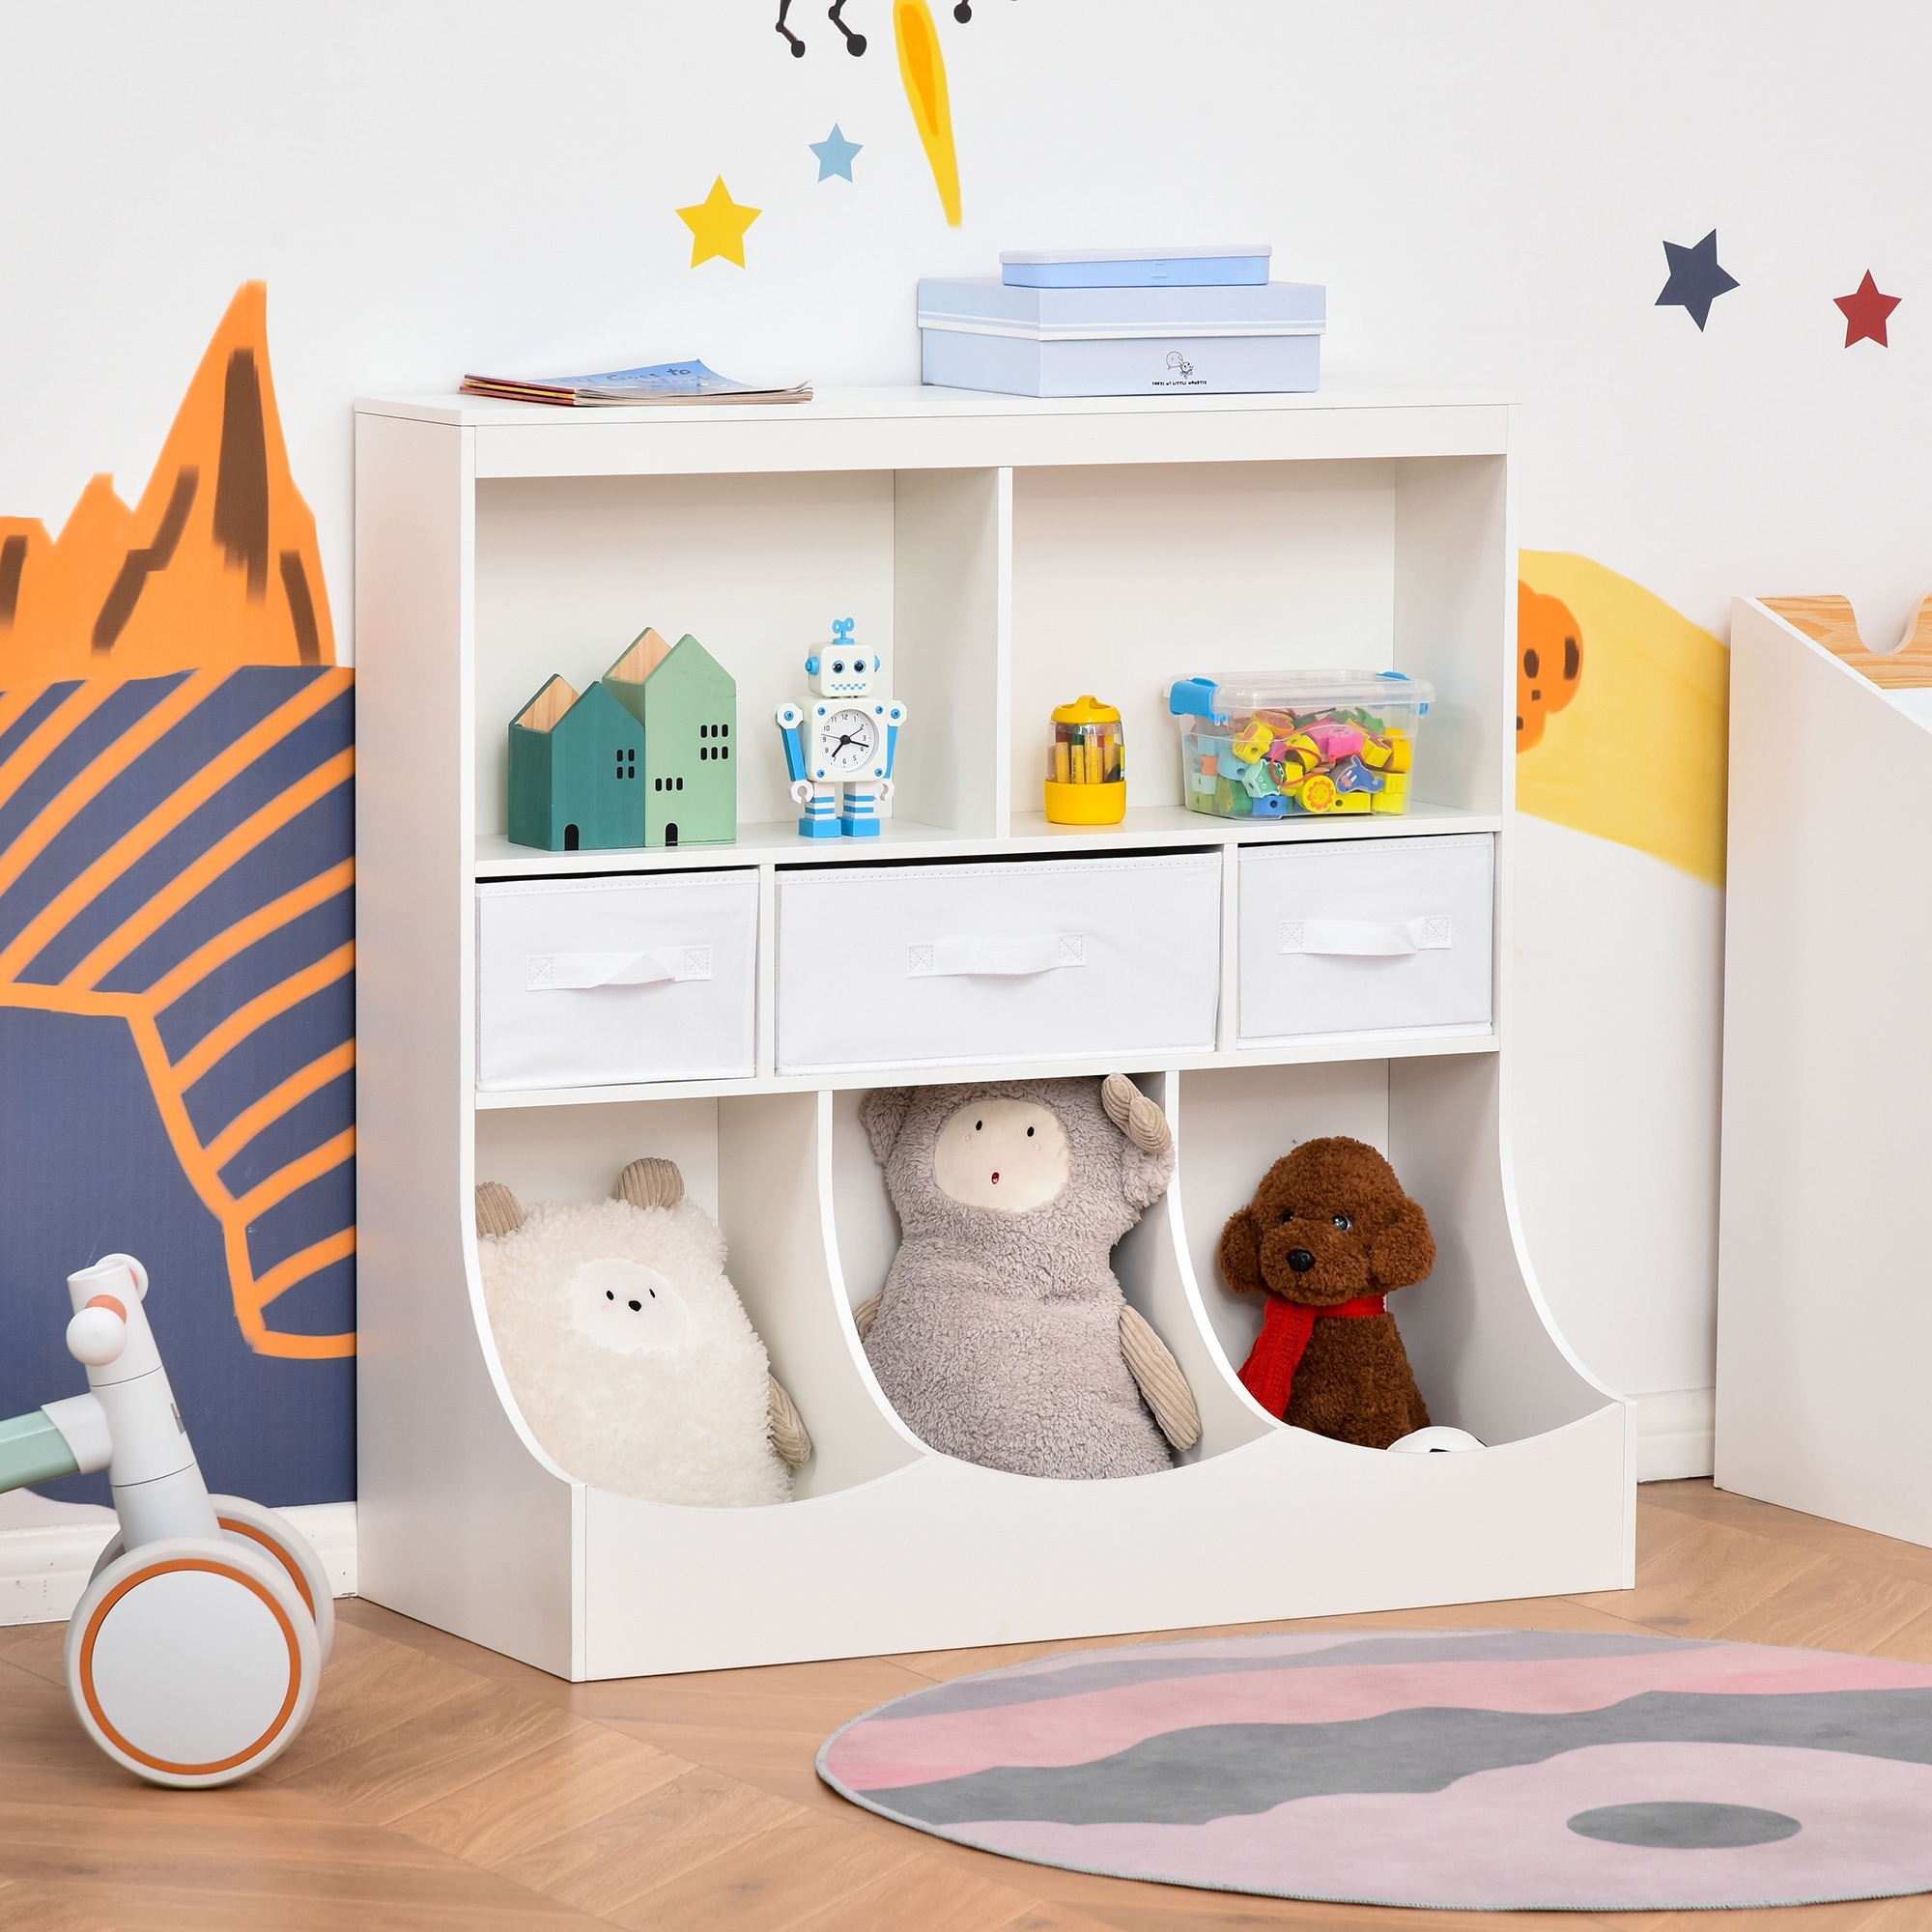 https://ak1.ostkcdn.com/images/products/is/images/direct/10fe0b40aa2c0c3deab1914757bf68a2284b28c4/HOMCOM-Toy-Chest-Kids-Cabinet-Freestanding-Storage-Organizer-Children-Bookcase-Display-Shelf-Wardrobe-for-Toys-Clothes-Books.jpg